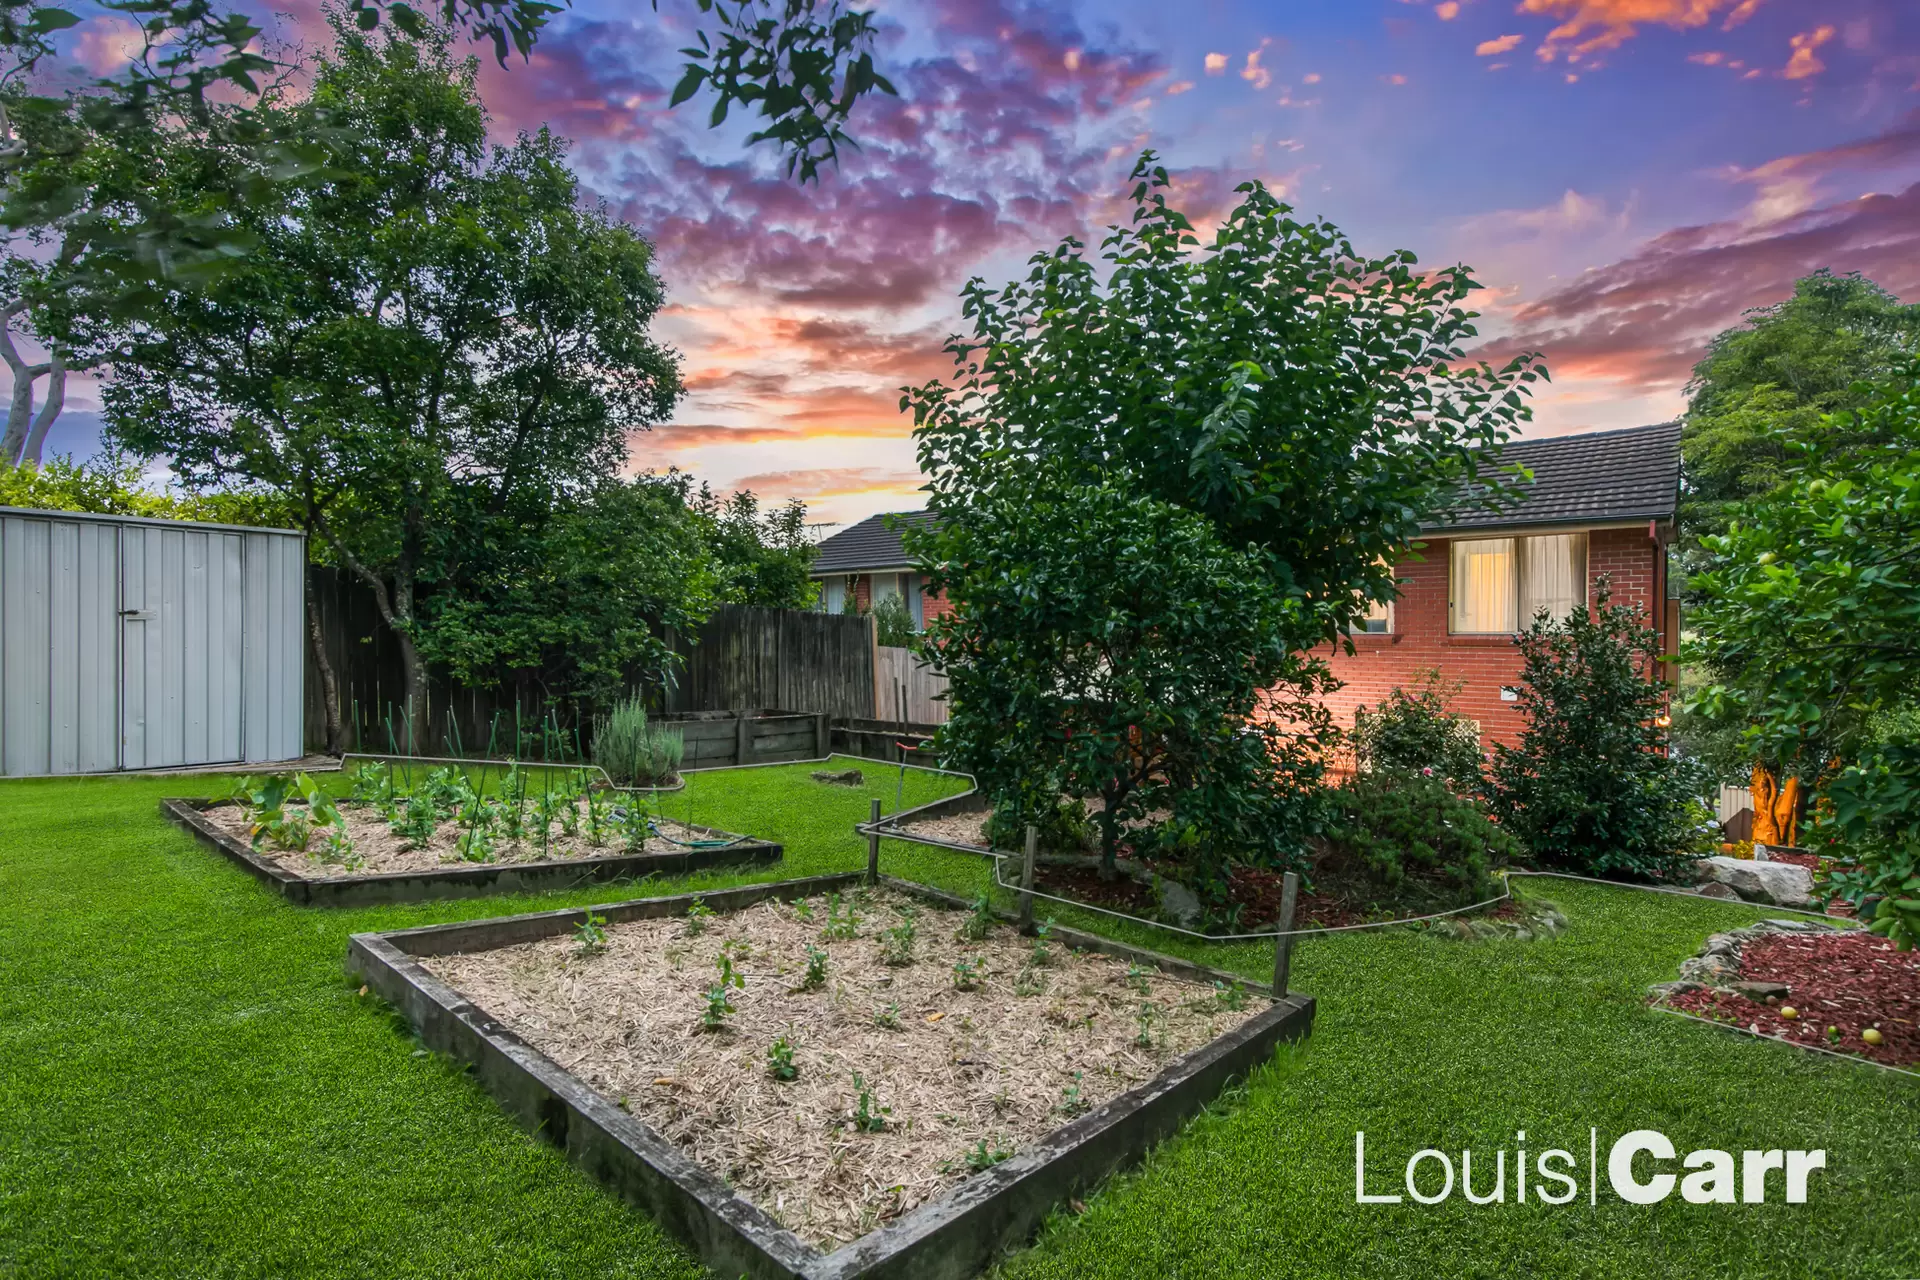 Photo #11: 159 Shepherds Drive, Cherrybrook - For Sale by Louis Carr Real Estate